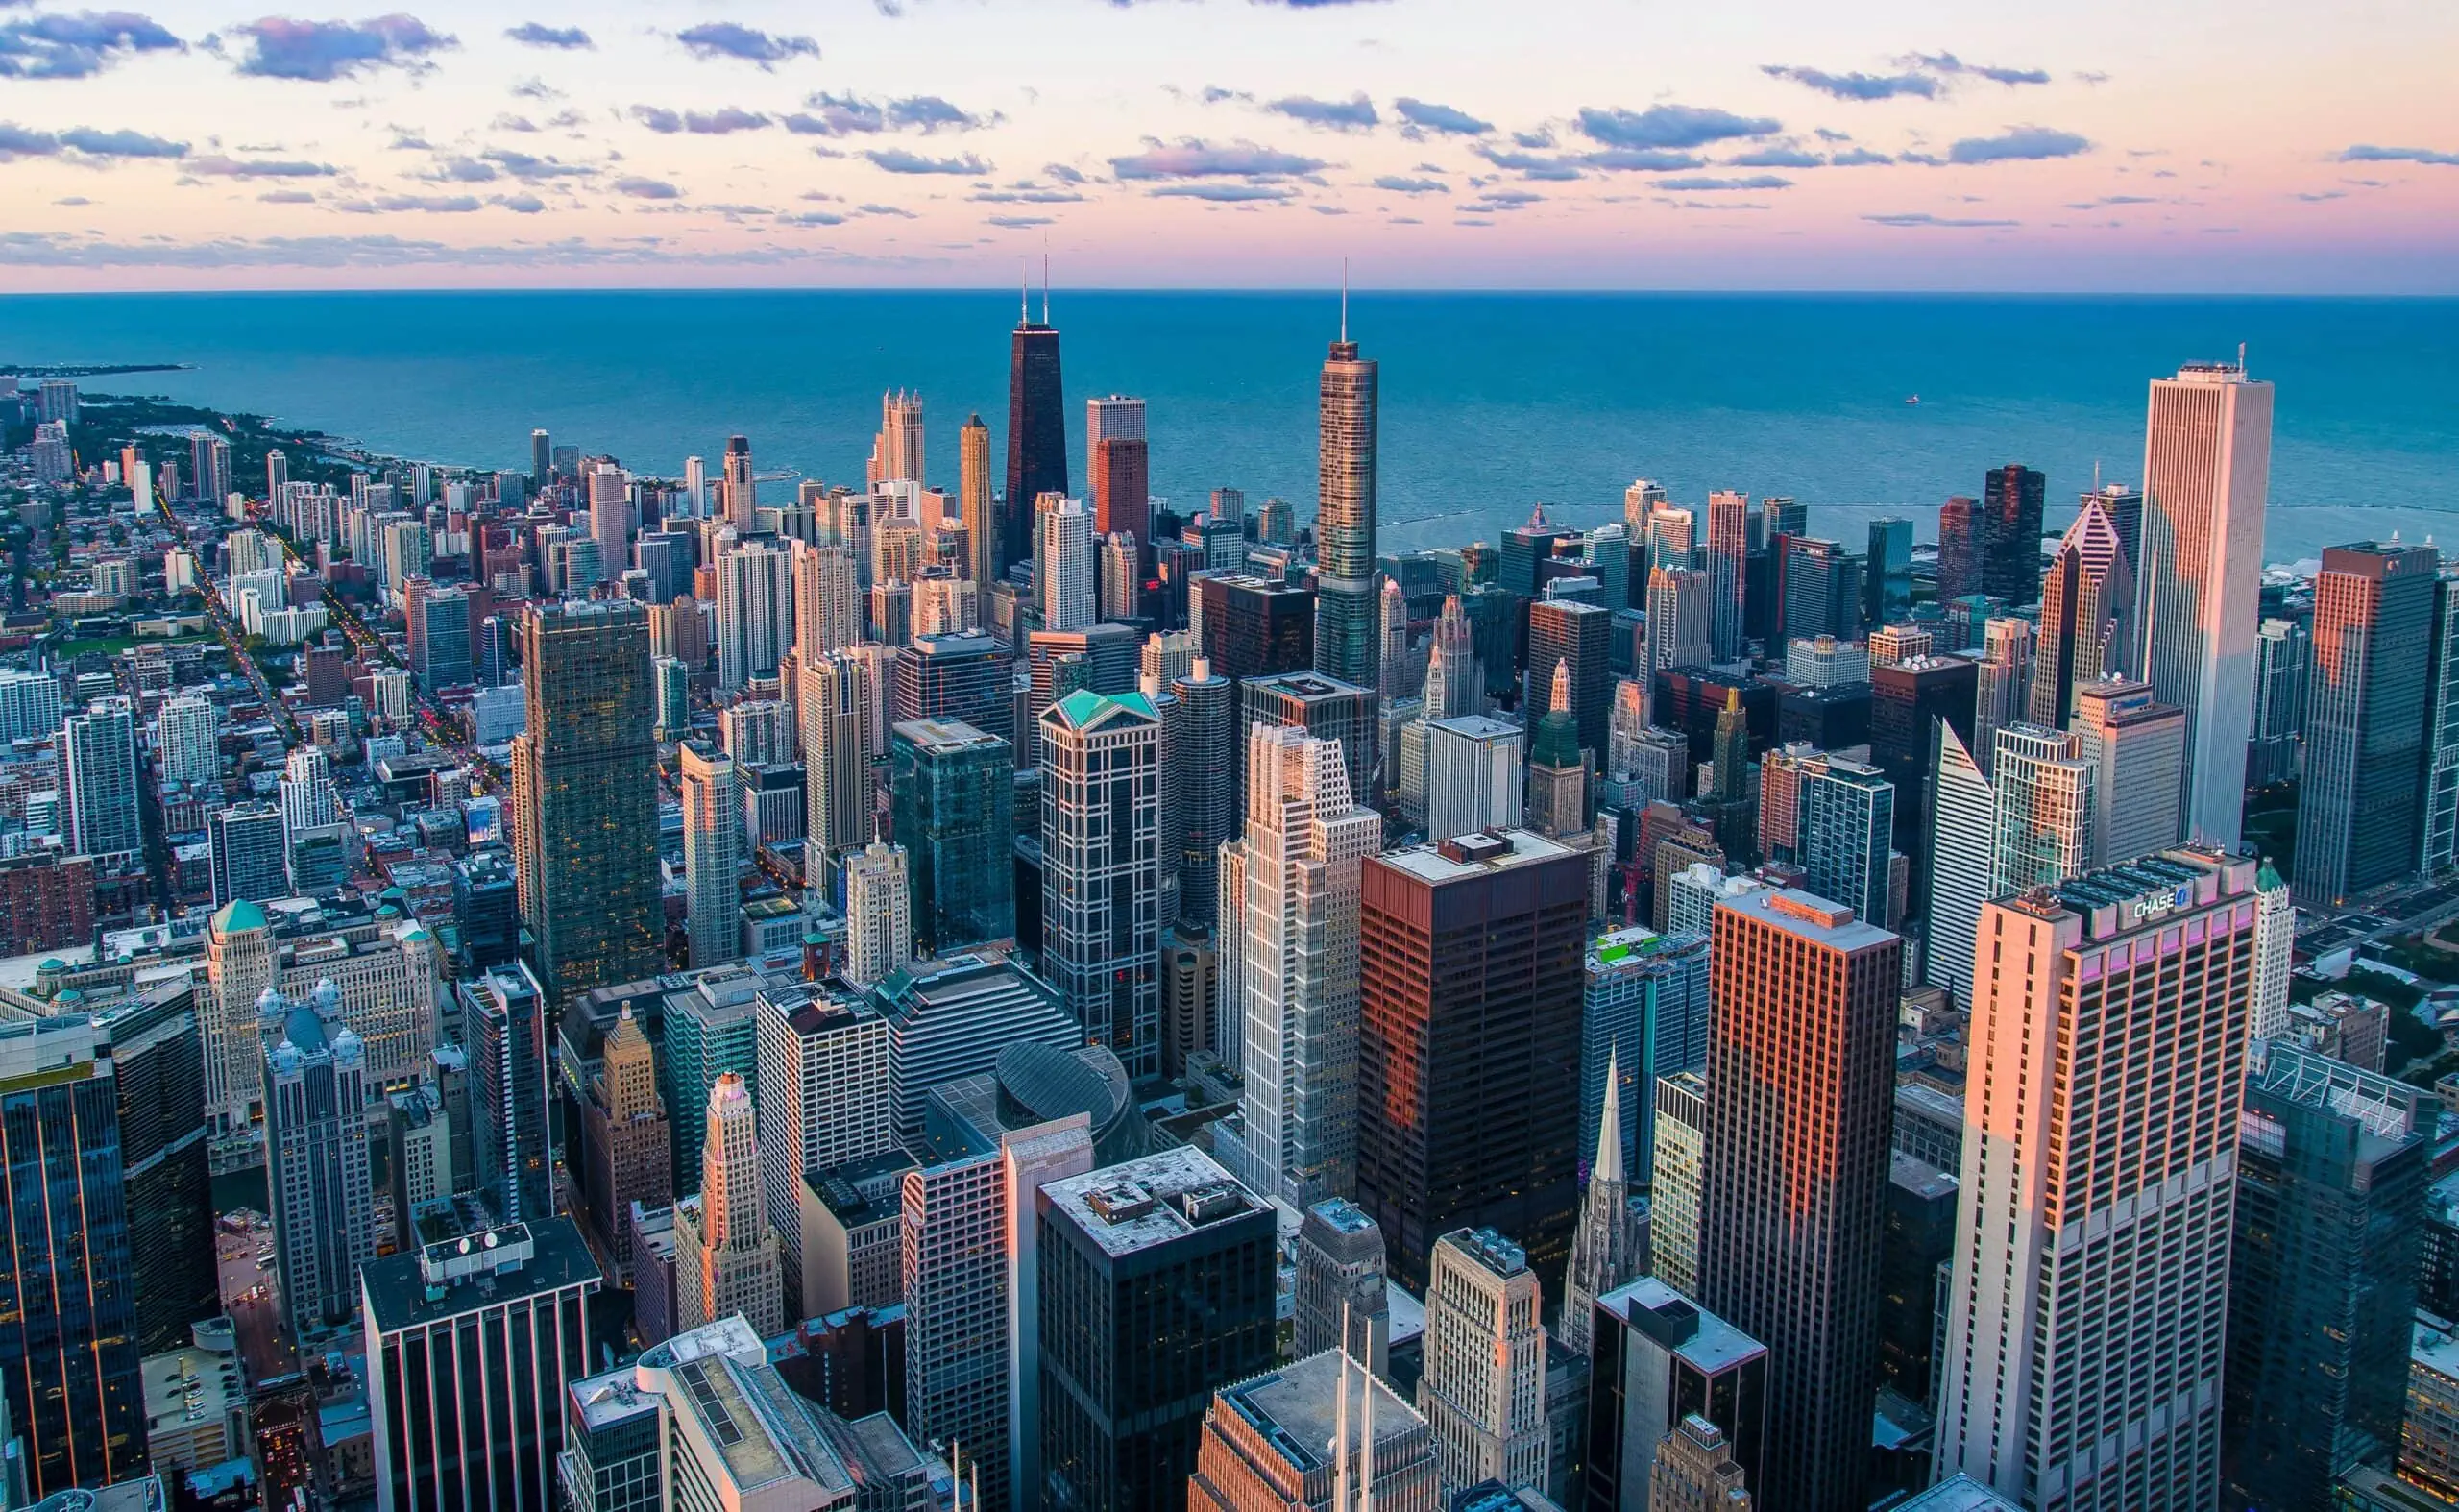 Skyline of Chicago that has city camera system